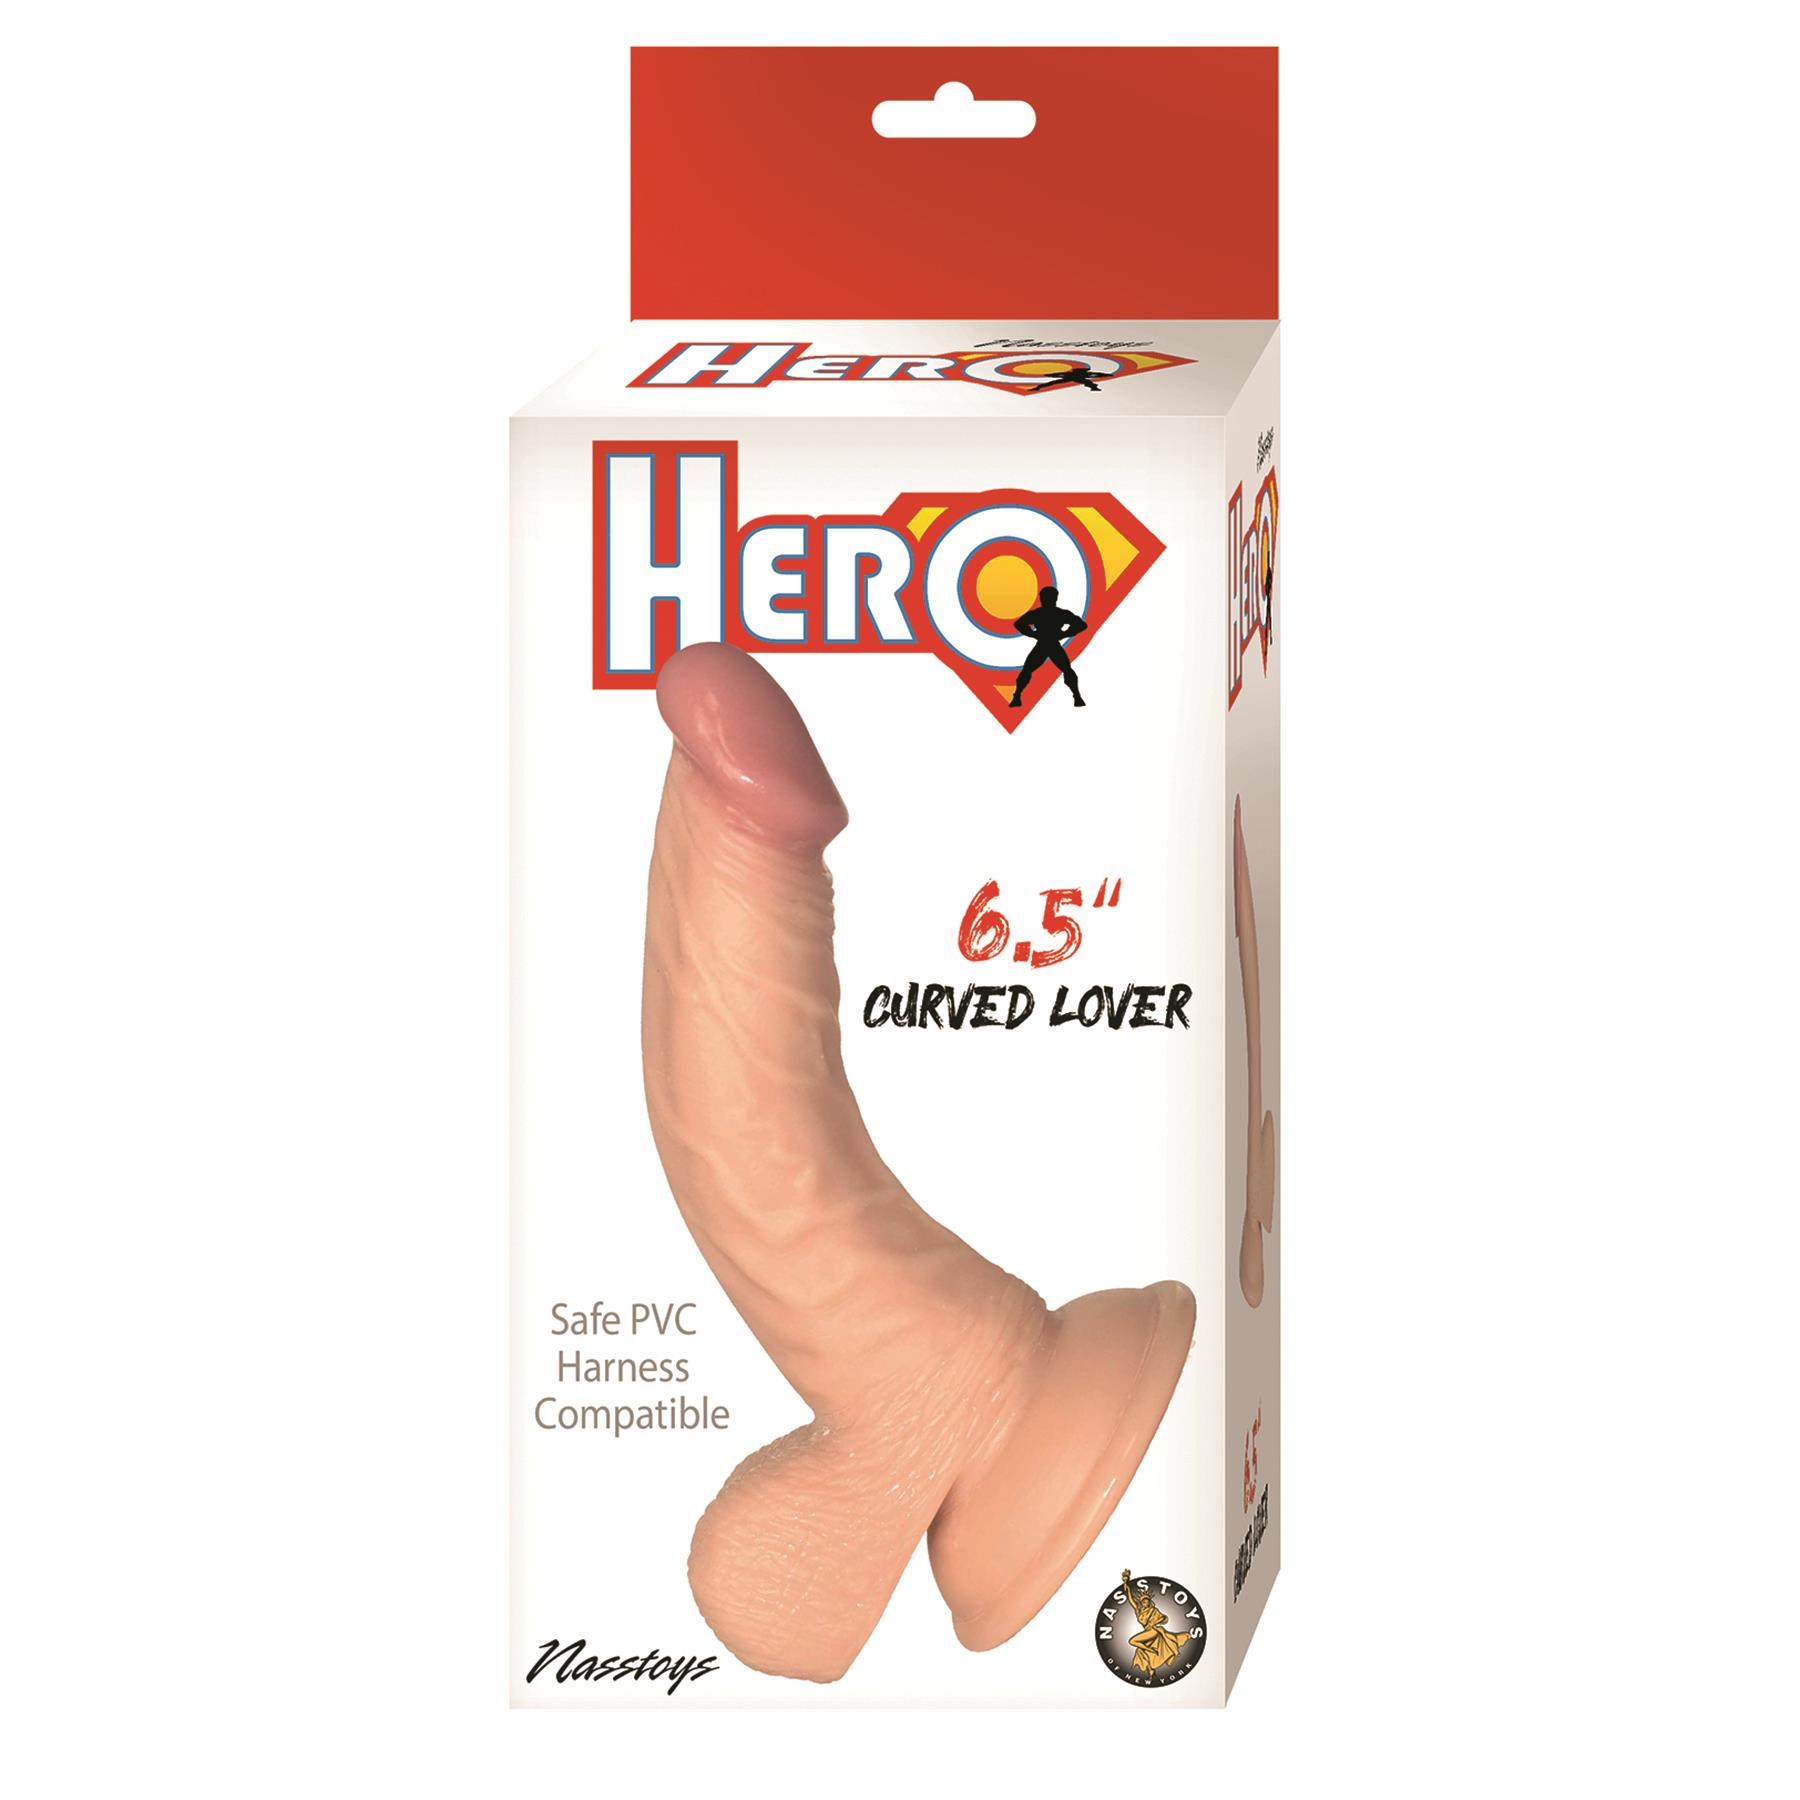 Hero 6.5 Inch Curved Lover Dildo Packaging Shot